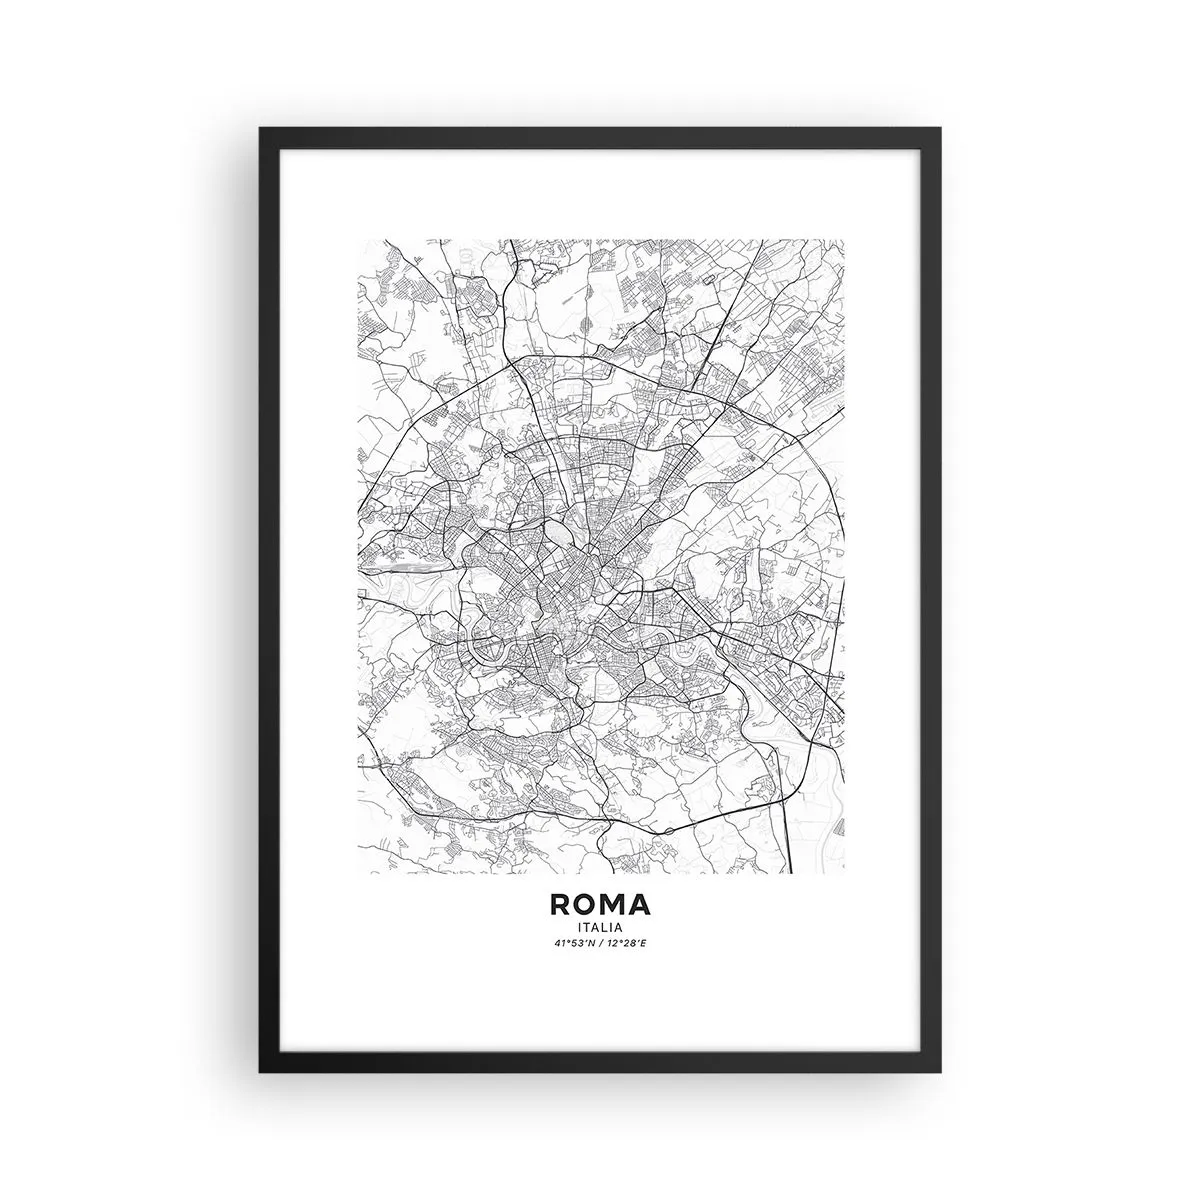 Poster in Black Frame Arttor 50x70 cm - Roman Circle - City, City Map, Rome, Graphics, Italy, For living-room, For bedroom, White, Black, Vertical, P2BPA50x70-4682